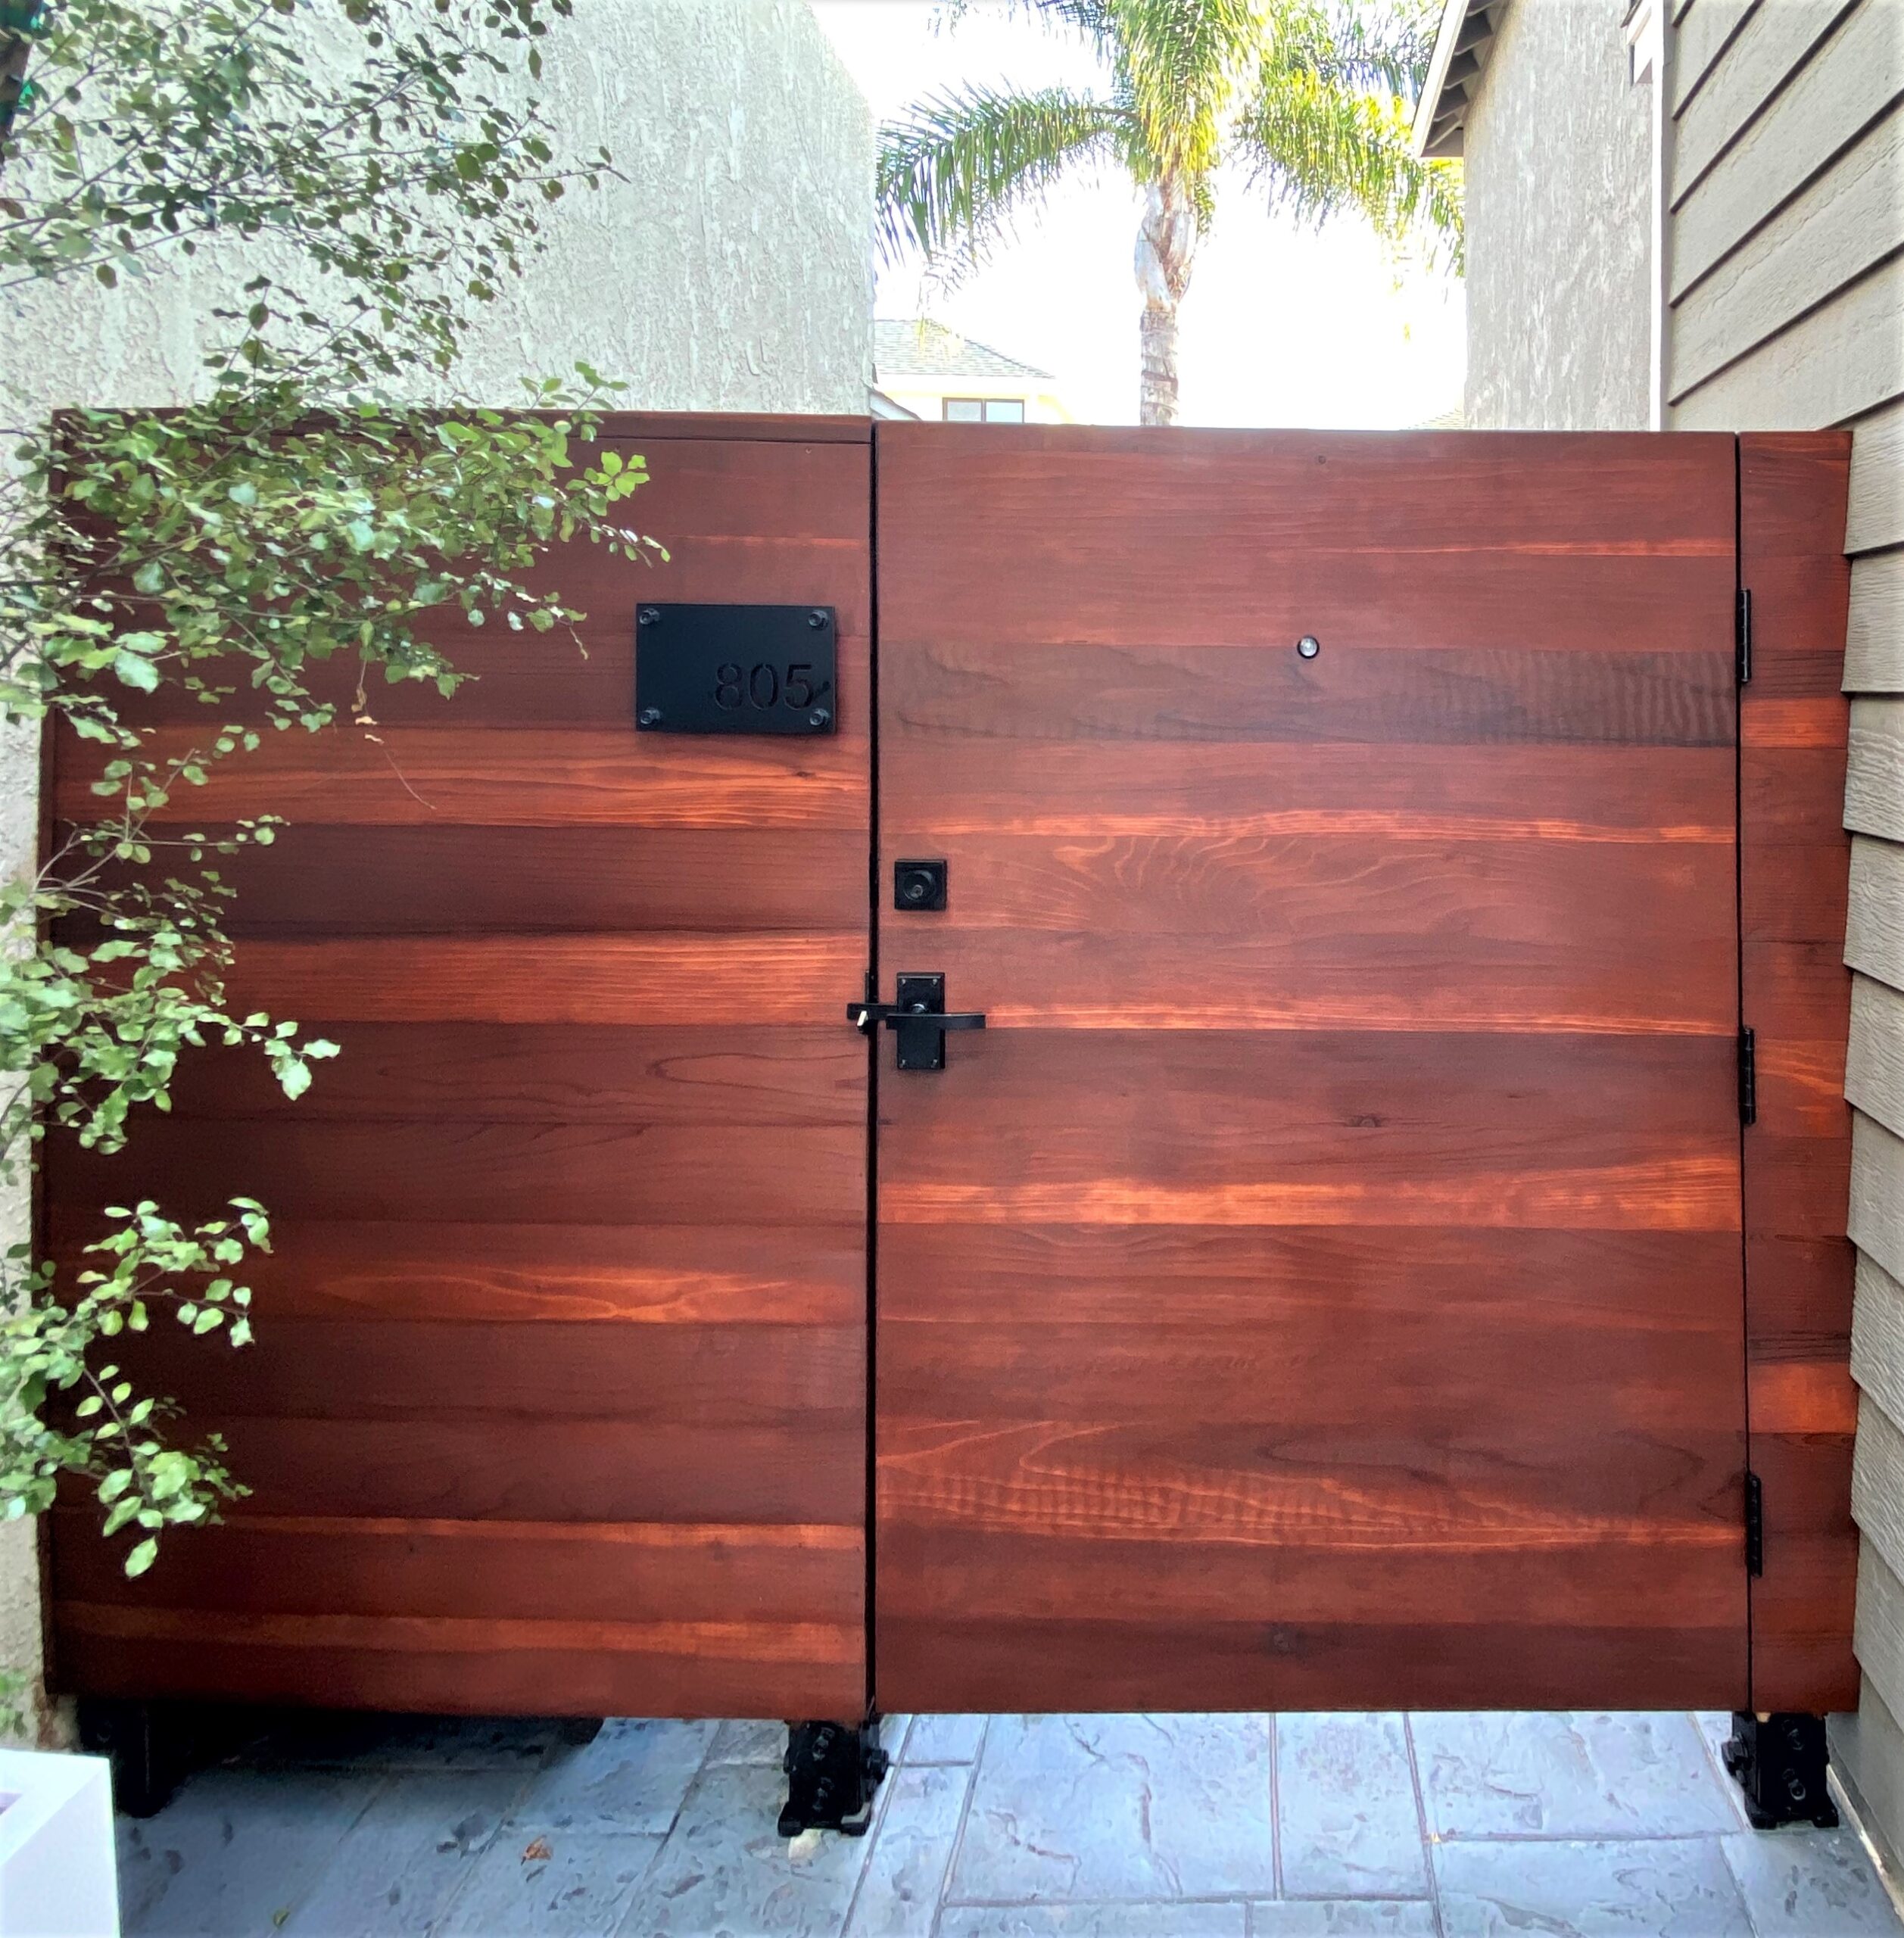 Contemporary Wood Gate with Nero Contemporary Gate Hardware and Square Modern Gate Lock